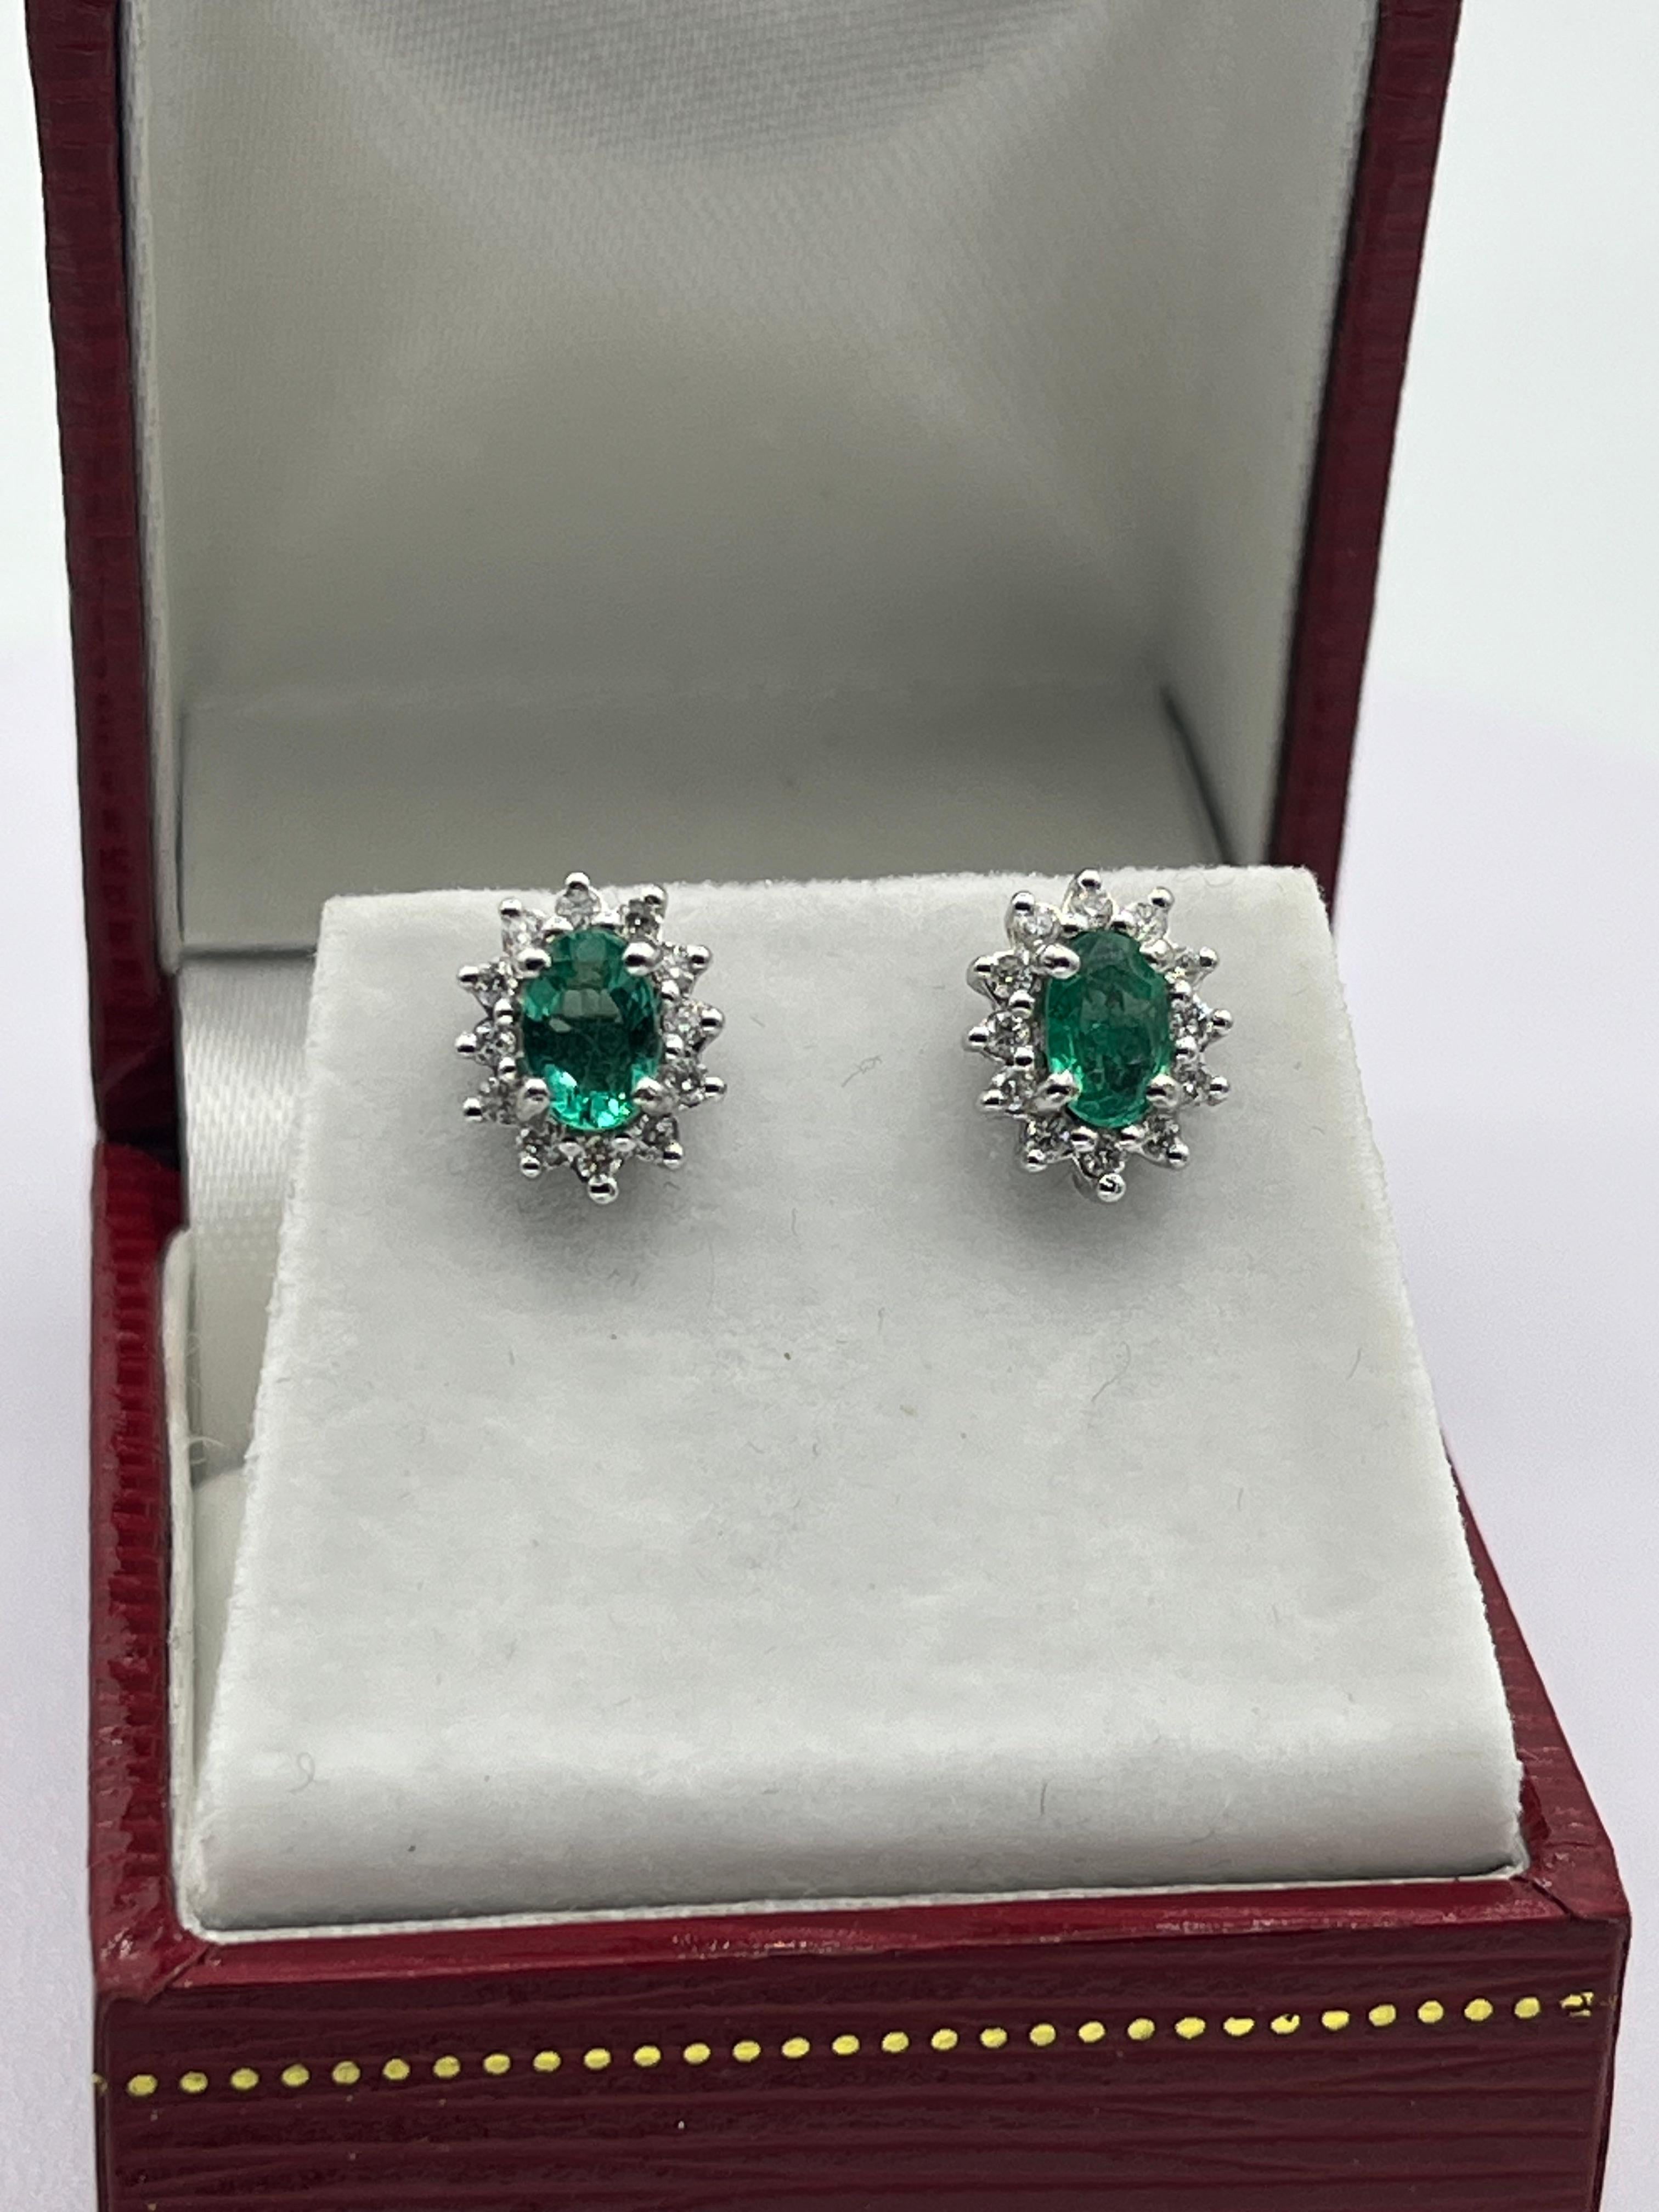 14 k white gold
0.88 ct emerald
0,27 ct. diamond
weight 4,3 gram
earring is 10 x 8 mm
it is a earring you can wear every day